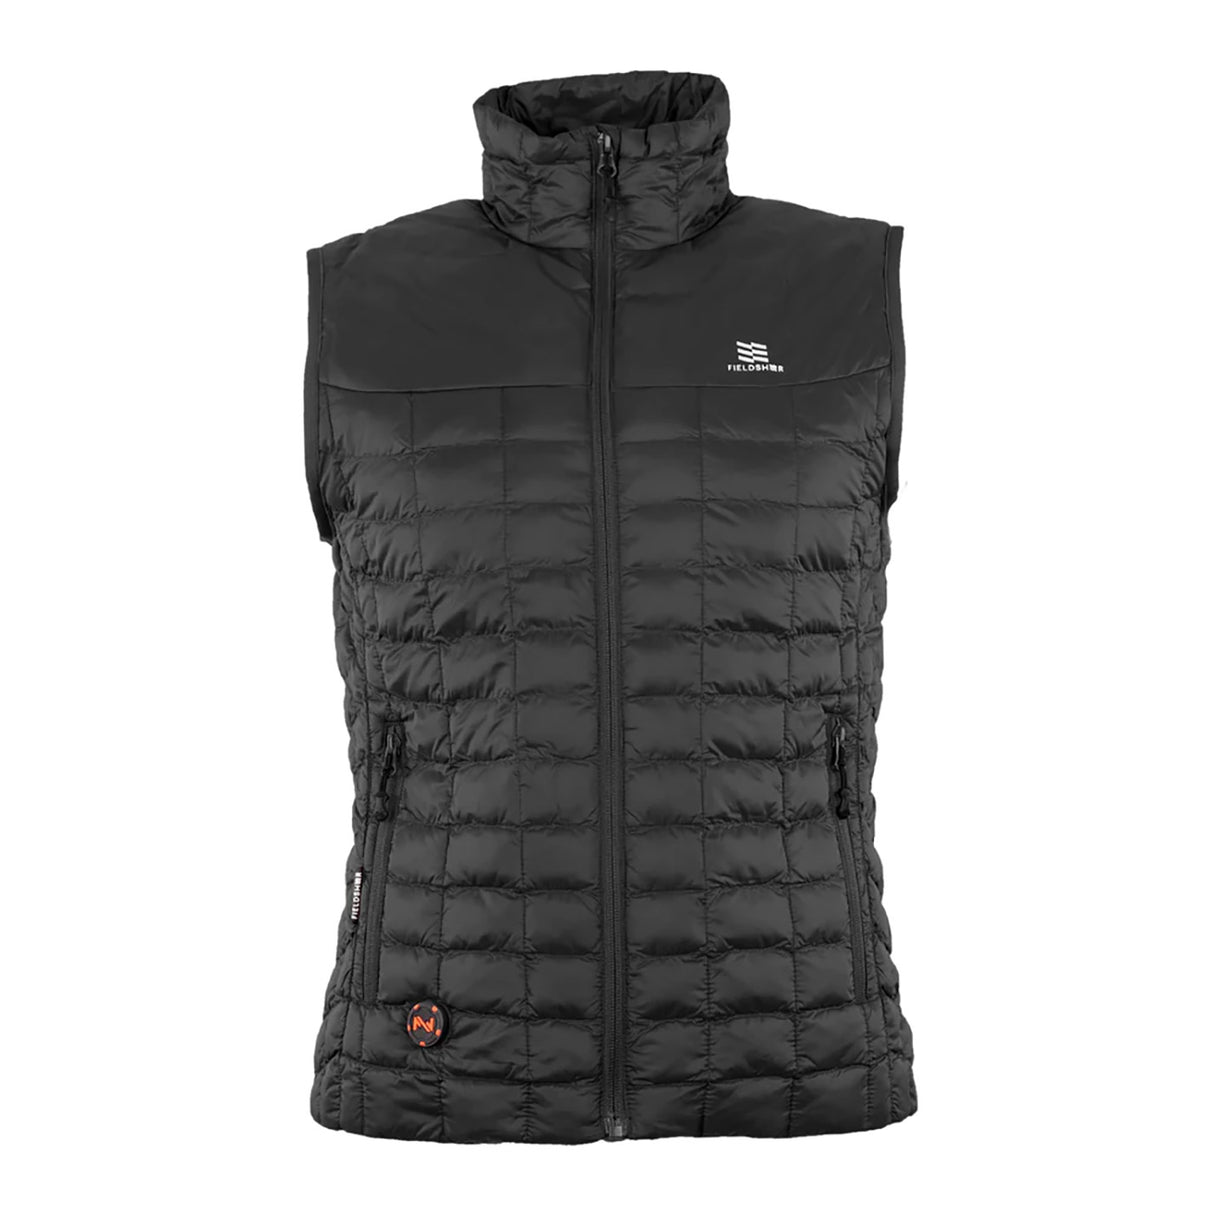 Fieldsheer By Mobile Warming Backcountry Heated Vest